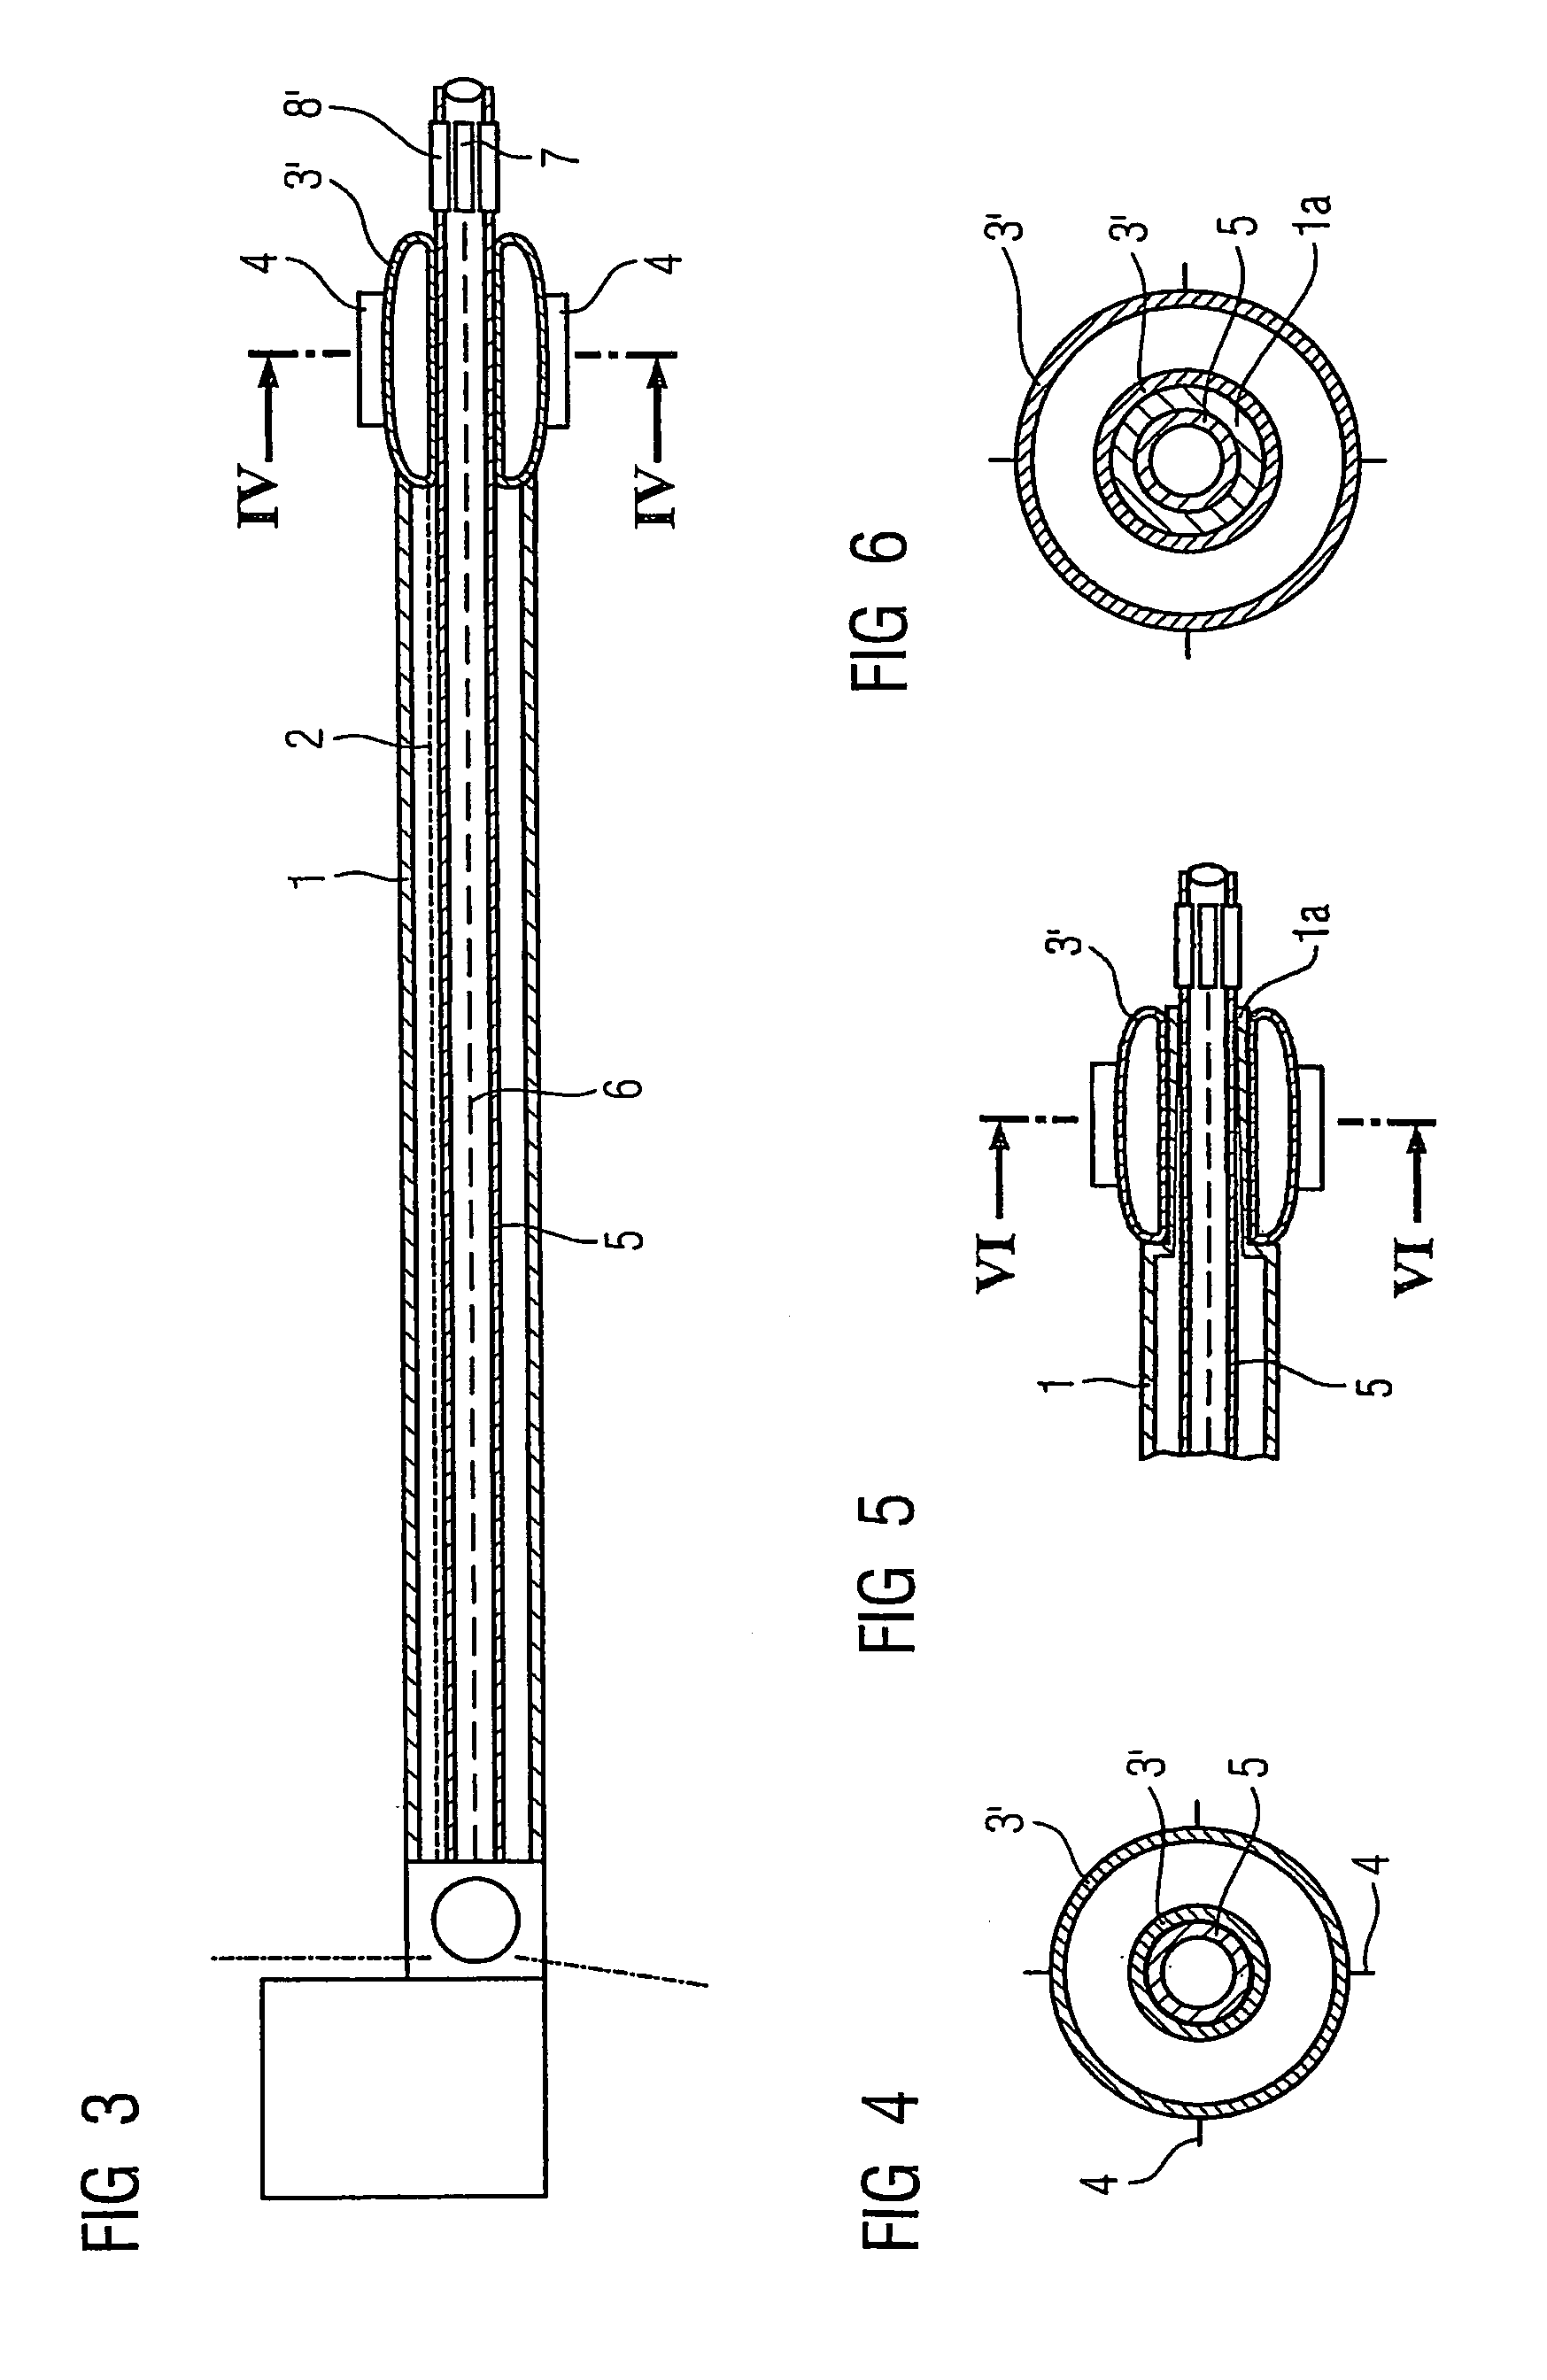 Catheter device for applying a medical cutting balloon intervention